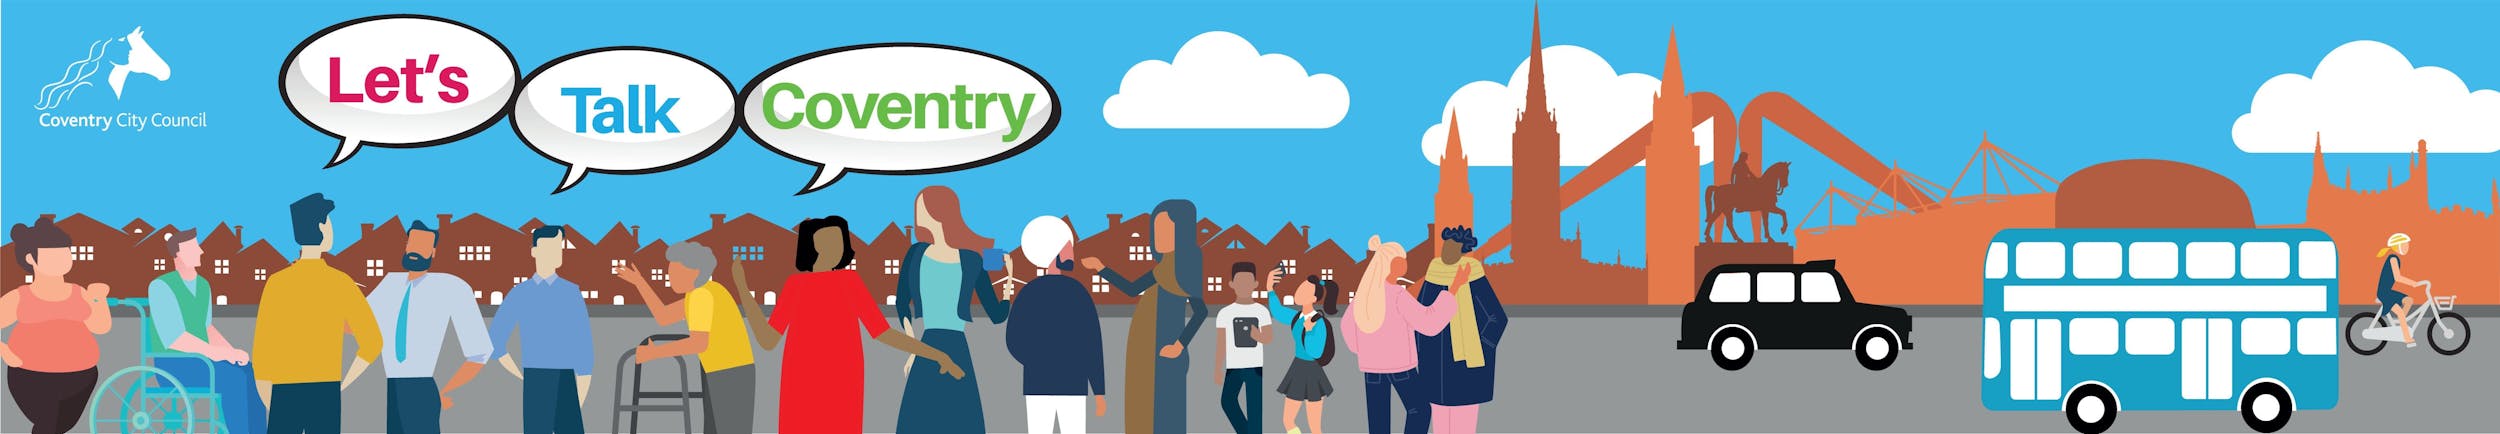 Get involved in Coventry City Council's live consultations